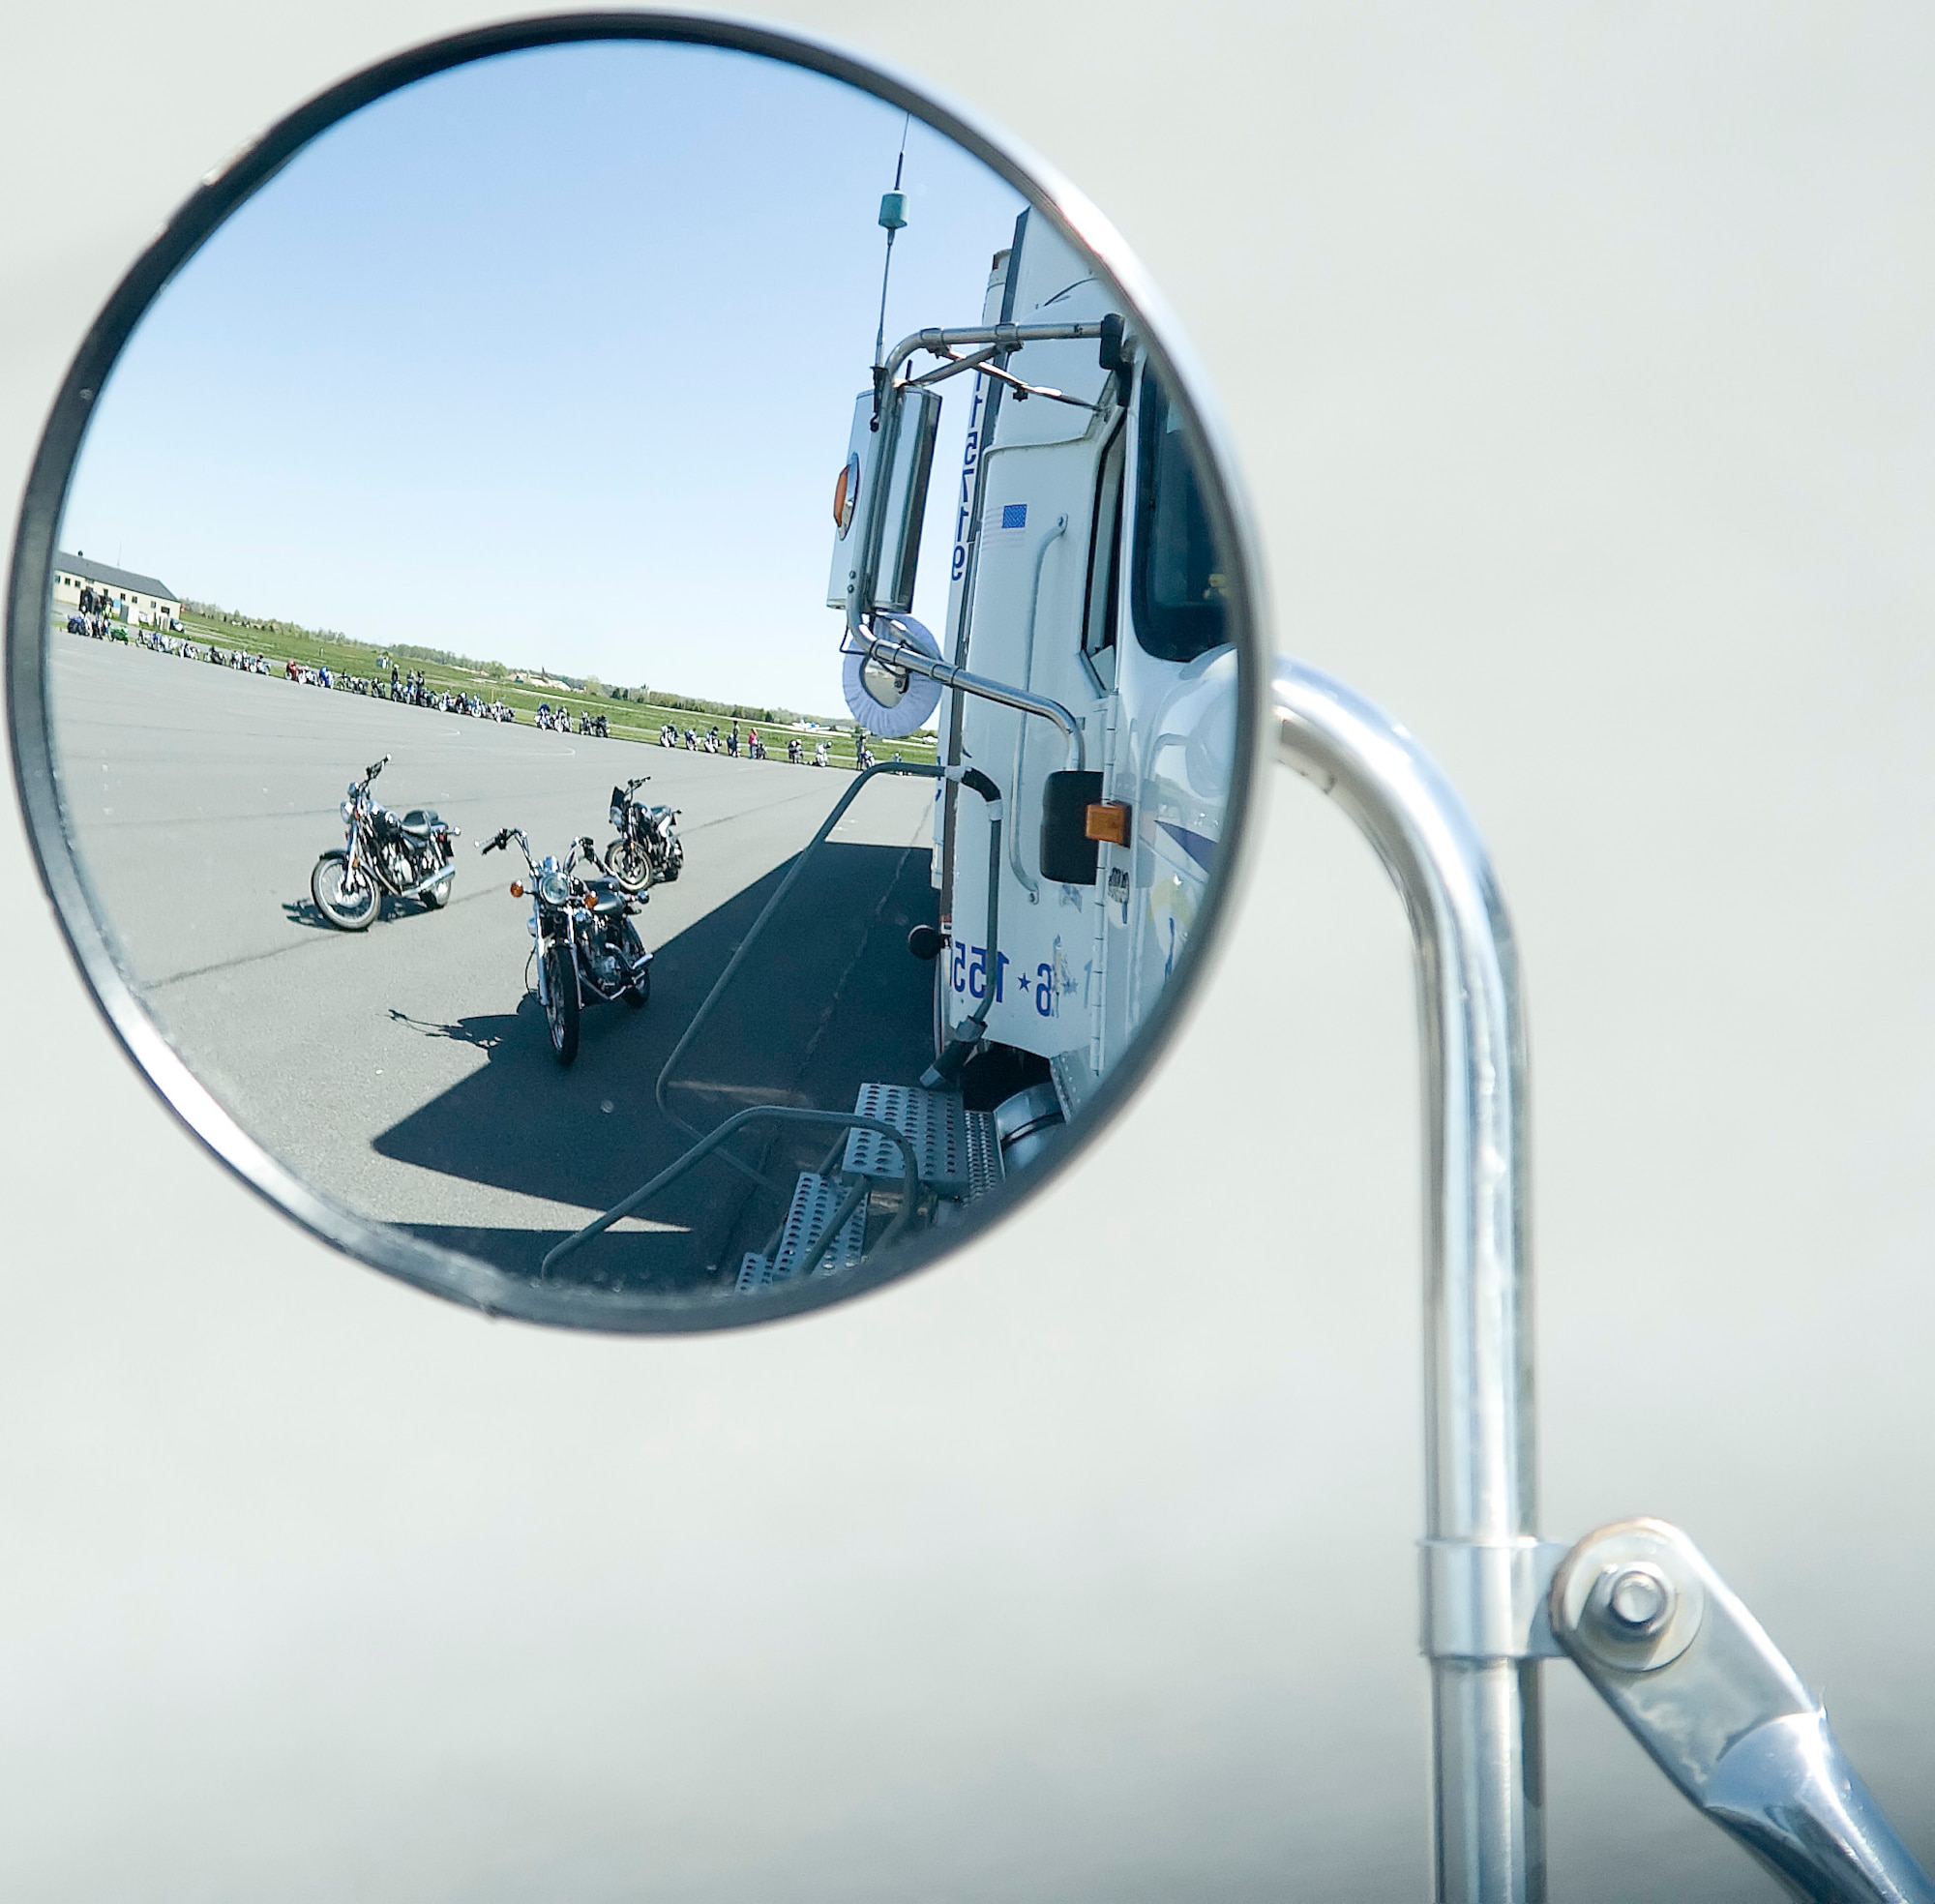 The no-zone truck reveals blind spots of tractor-trailer drivers during Motorcycle Safety Day April 13, 2012, at Dover Air Force Base, Del. Motorcycle Safety Day is a yearly event held to ensure riders and motorists stay safe on the road. (U.S. Air Force photo by Adrian R. Rowan)